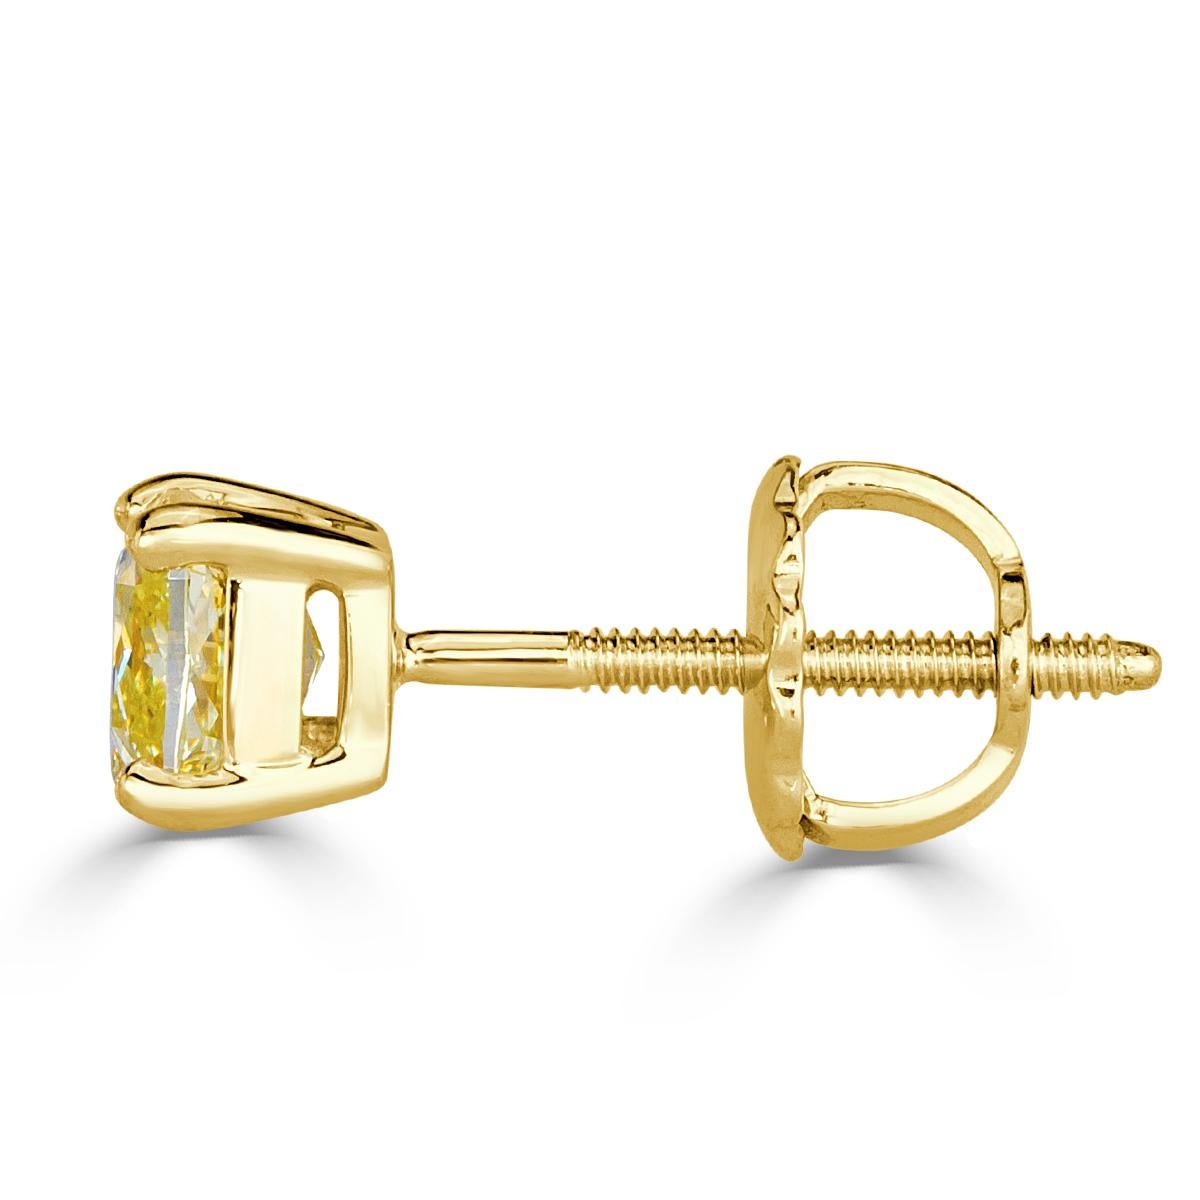 Handcrafted in 18k yellow gold, this lovely pair of diamond stud earrings showcases two cushion cut diamonds with a total weight of 1.00ct. They are graded at Fancy Yellow, VS1-VS2.